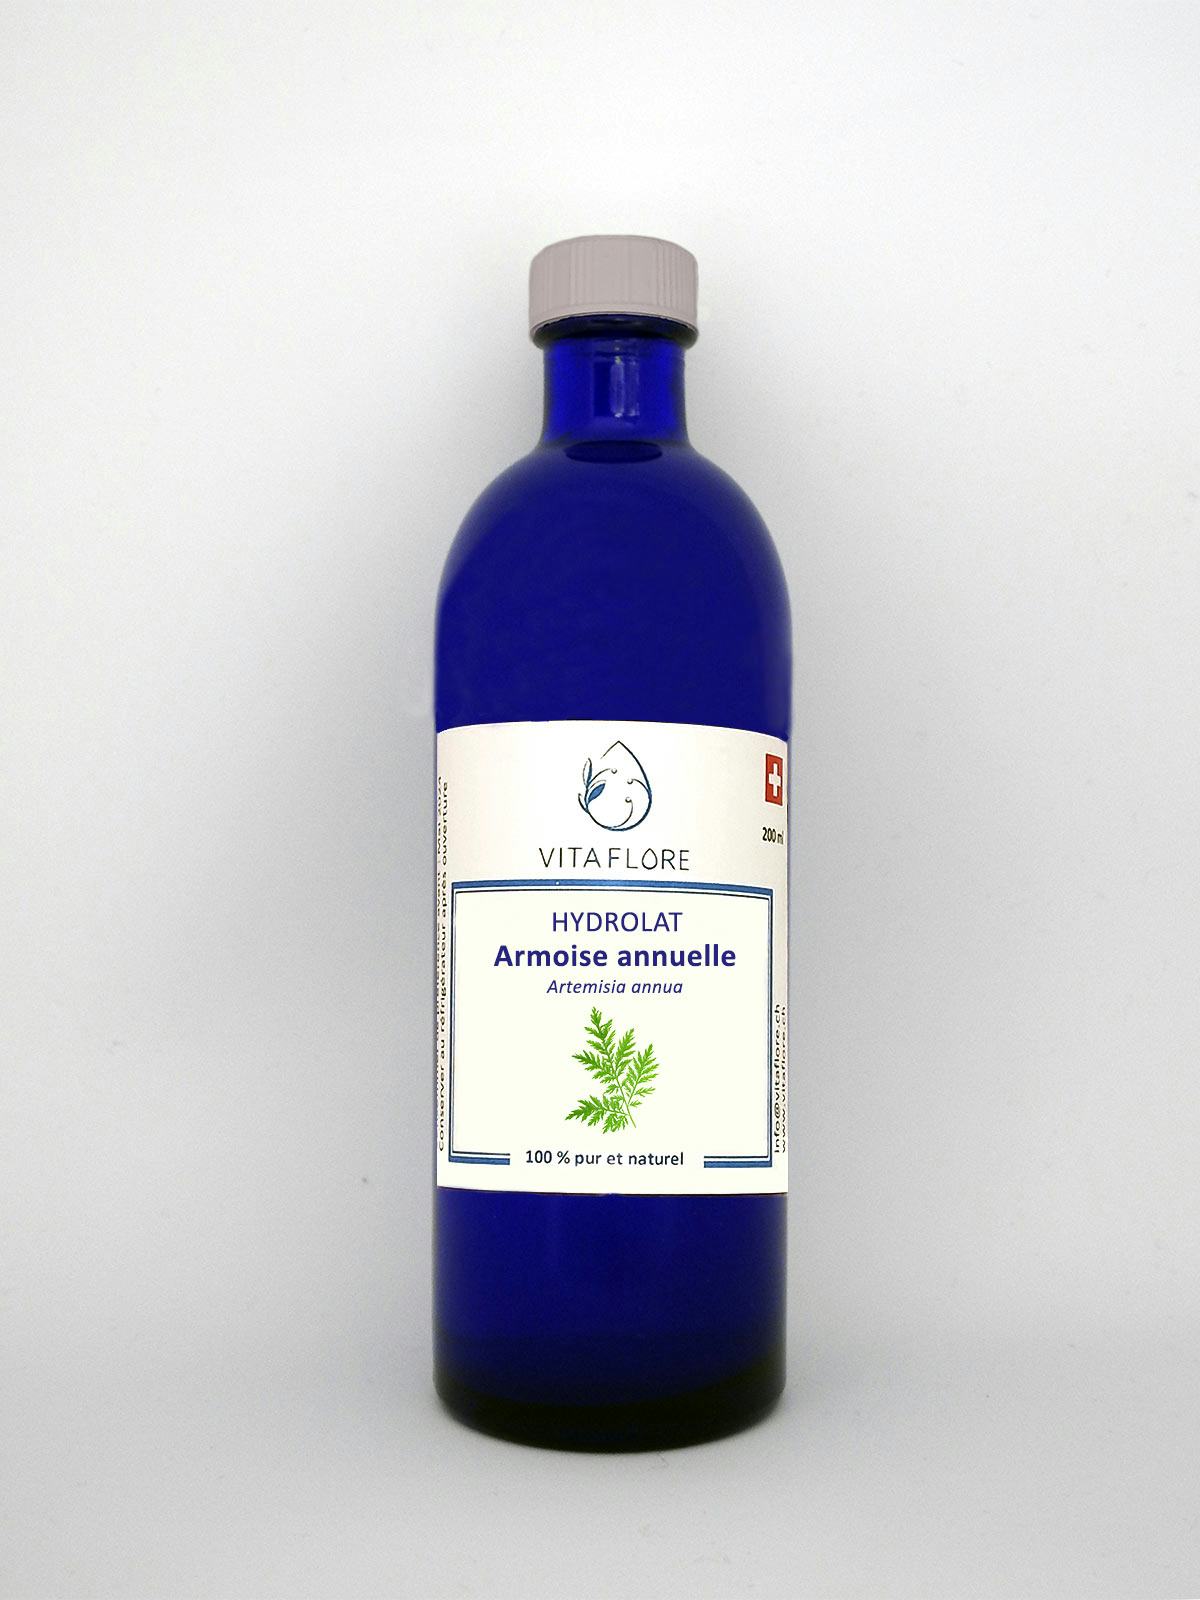 Hydrolat Armoise annuelle, artisanal product for direct sale in Switzerland